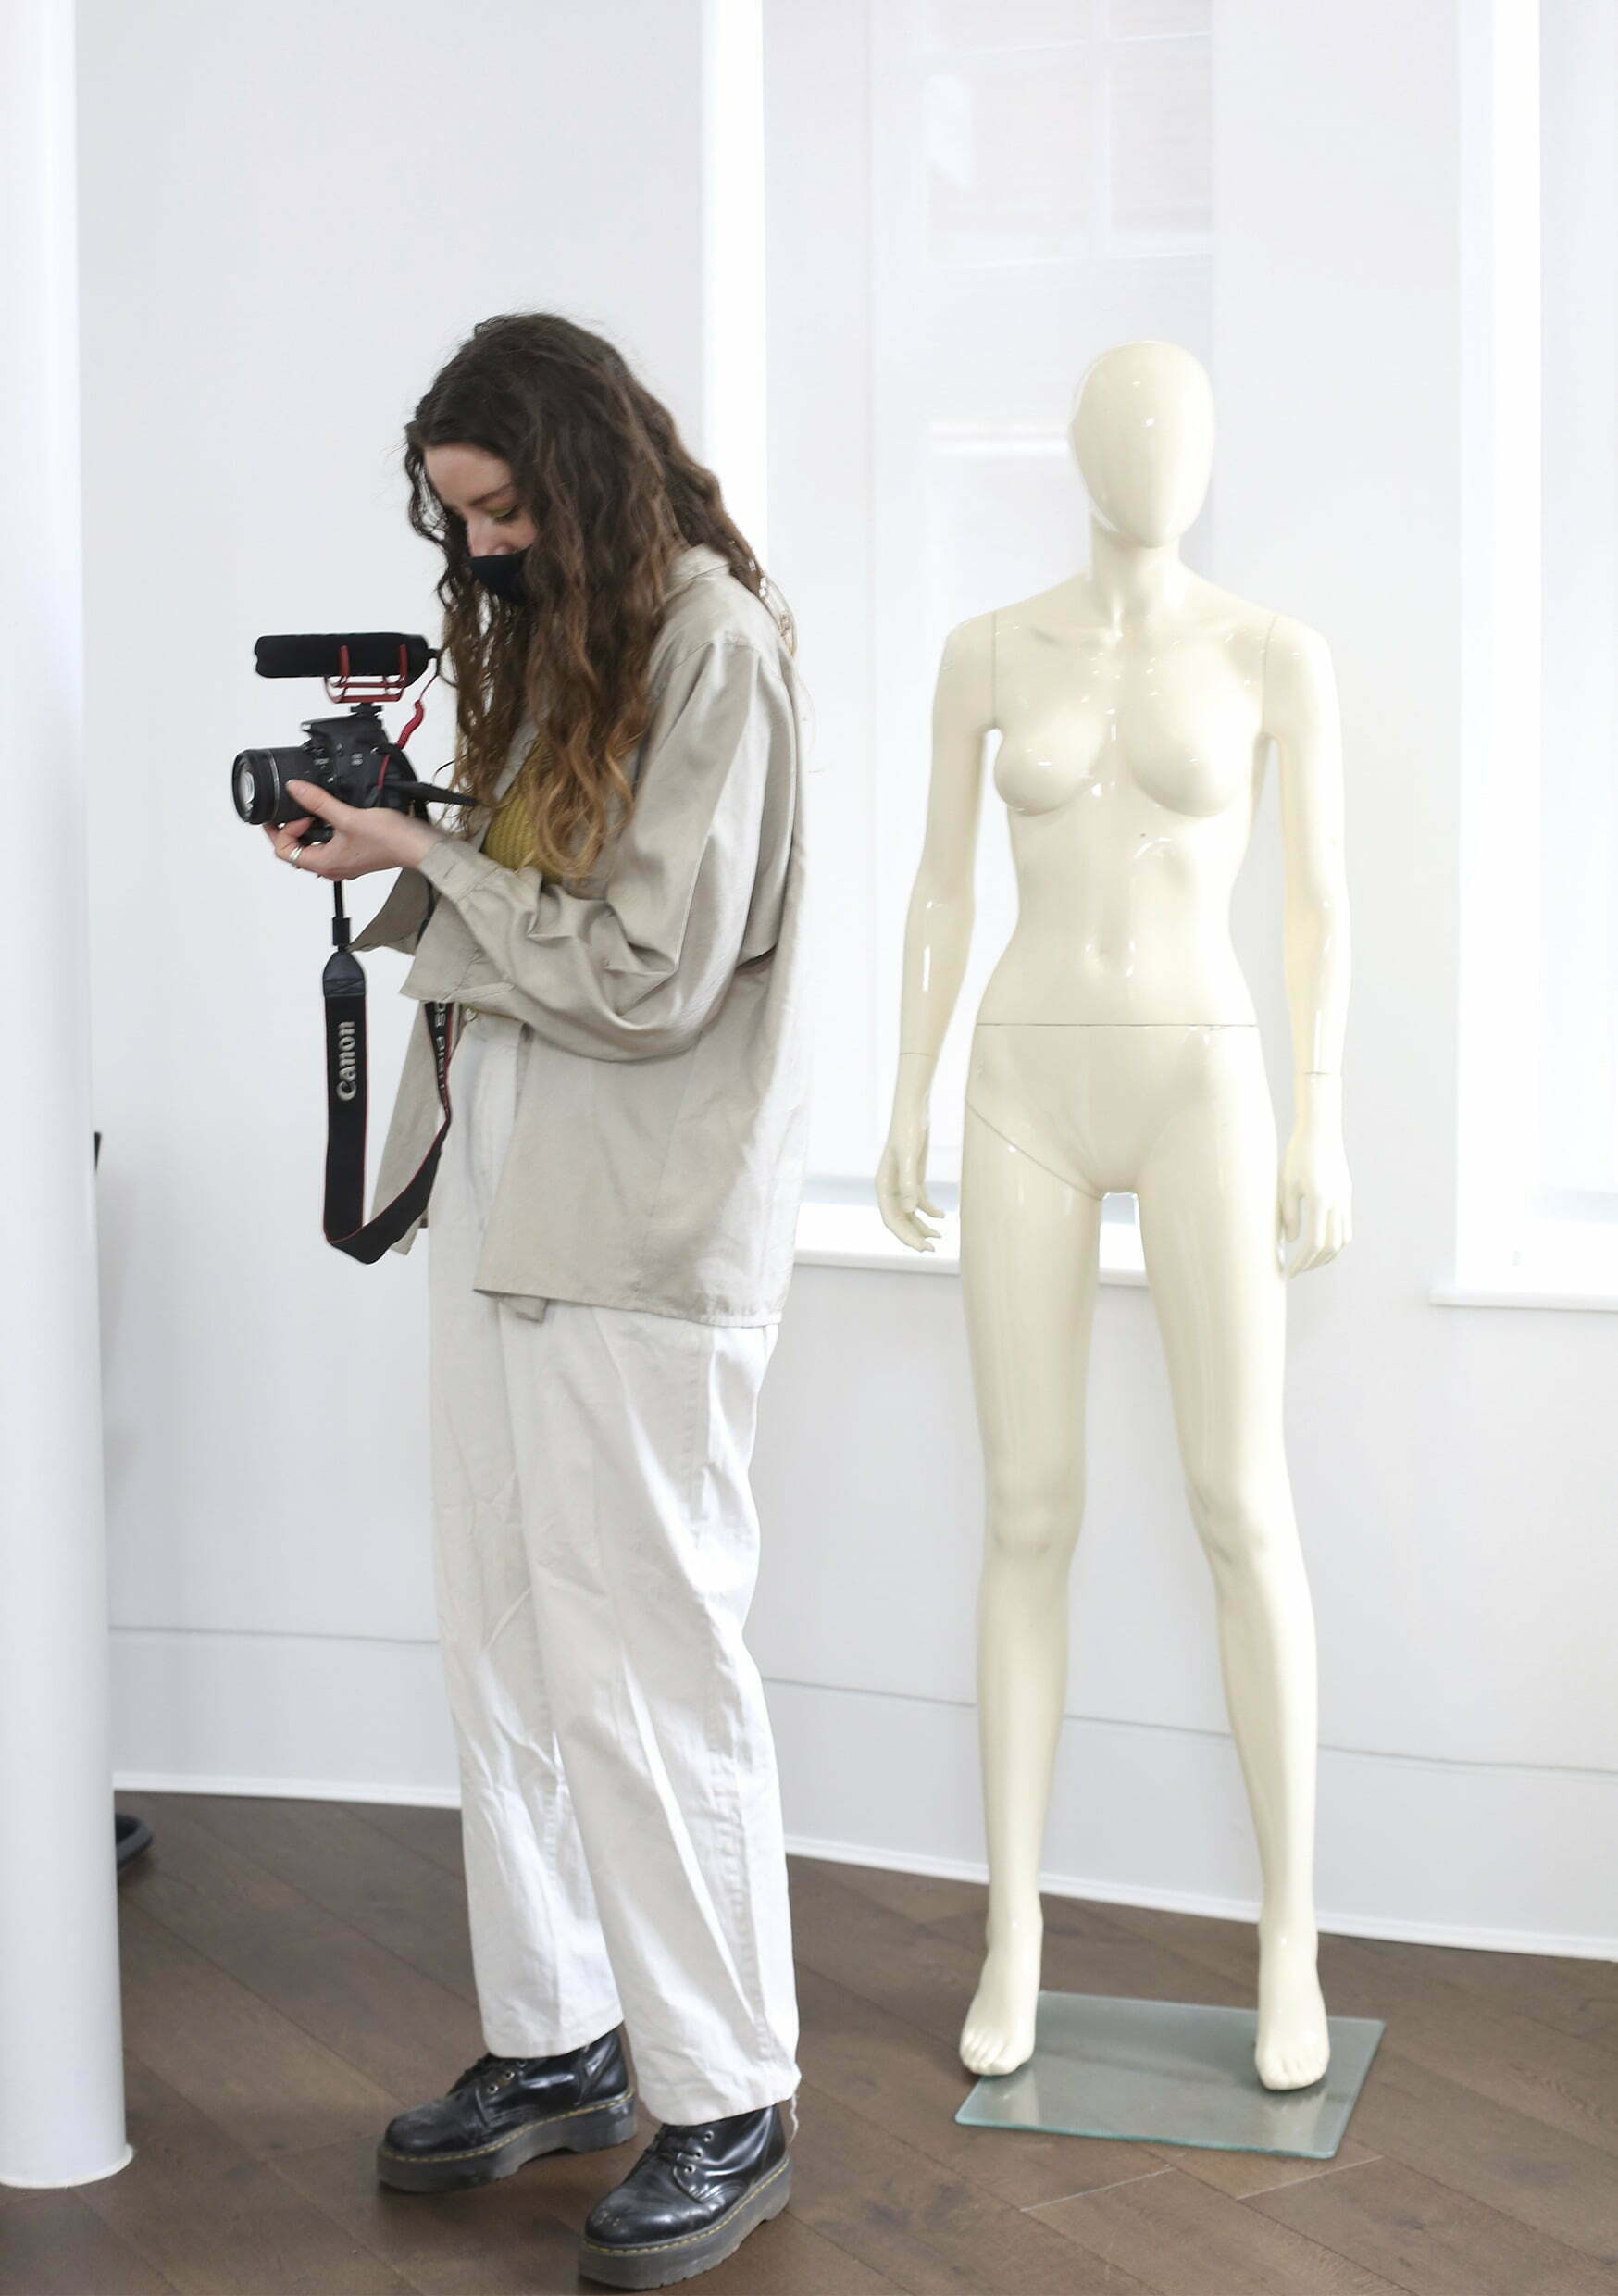 A woman dressed in a white sweatshirt and whte trousers looks through a film camera viewfinder in a white studio. A white undressed manequin is behind her.